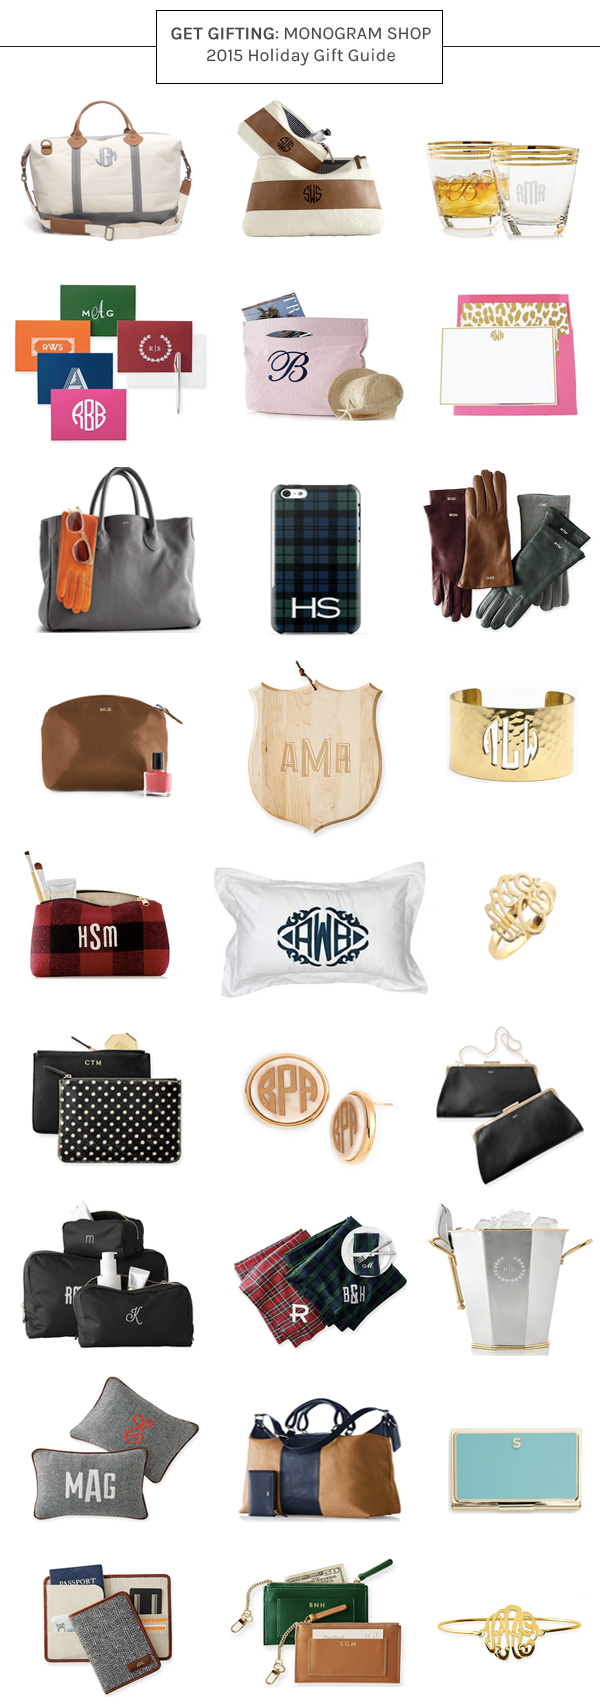 The Best Monogrammed Gifts To Give